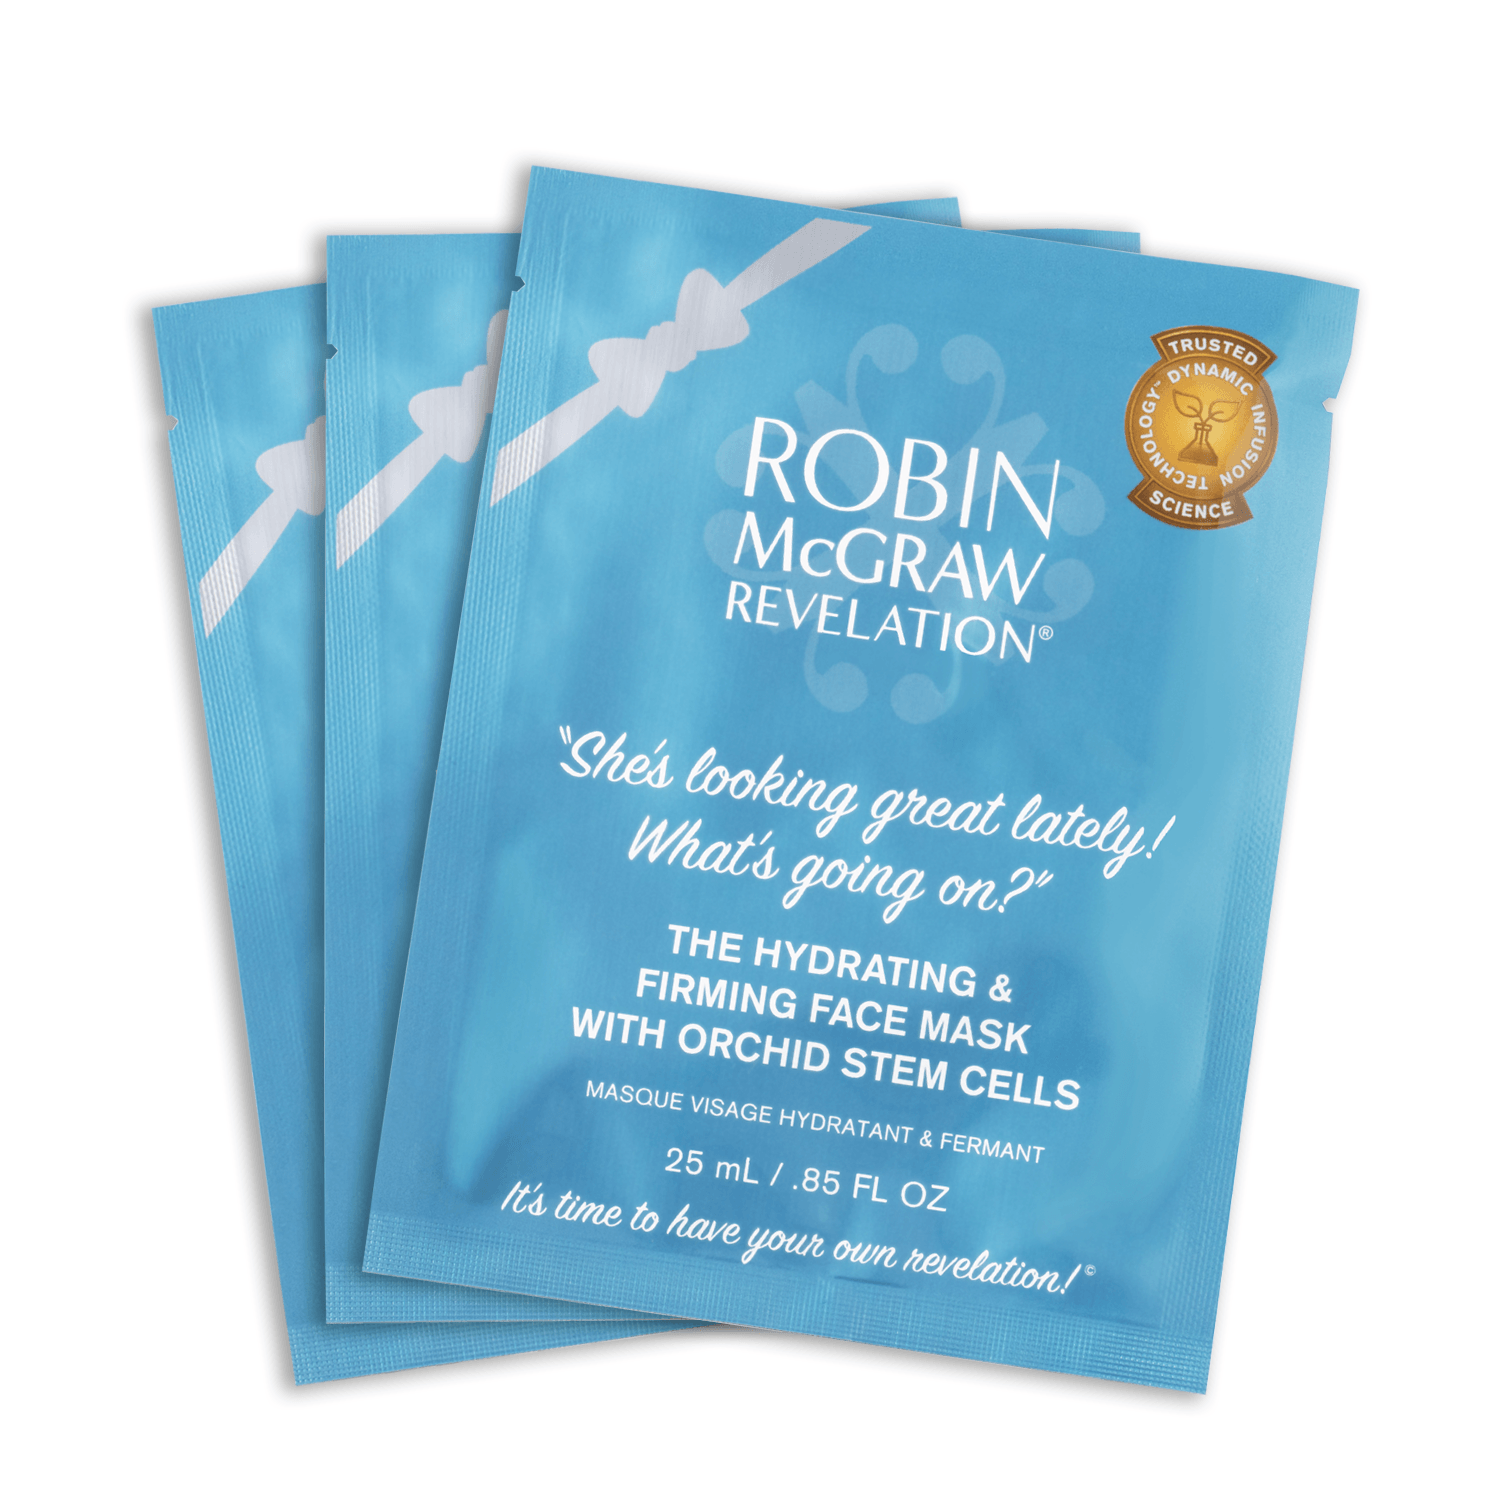 Robin McGraw Revelation Hydrating & Firming Bio-Cellulose Face Sheet Mask